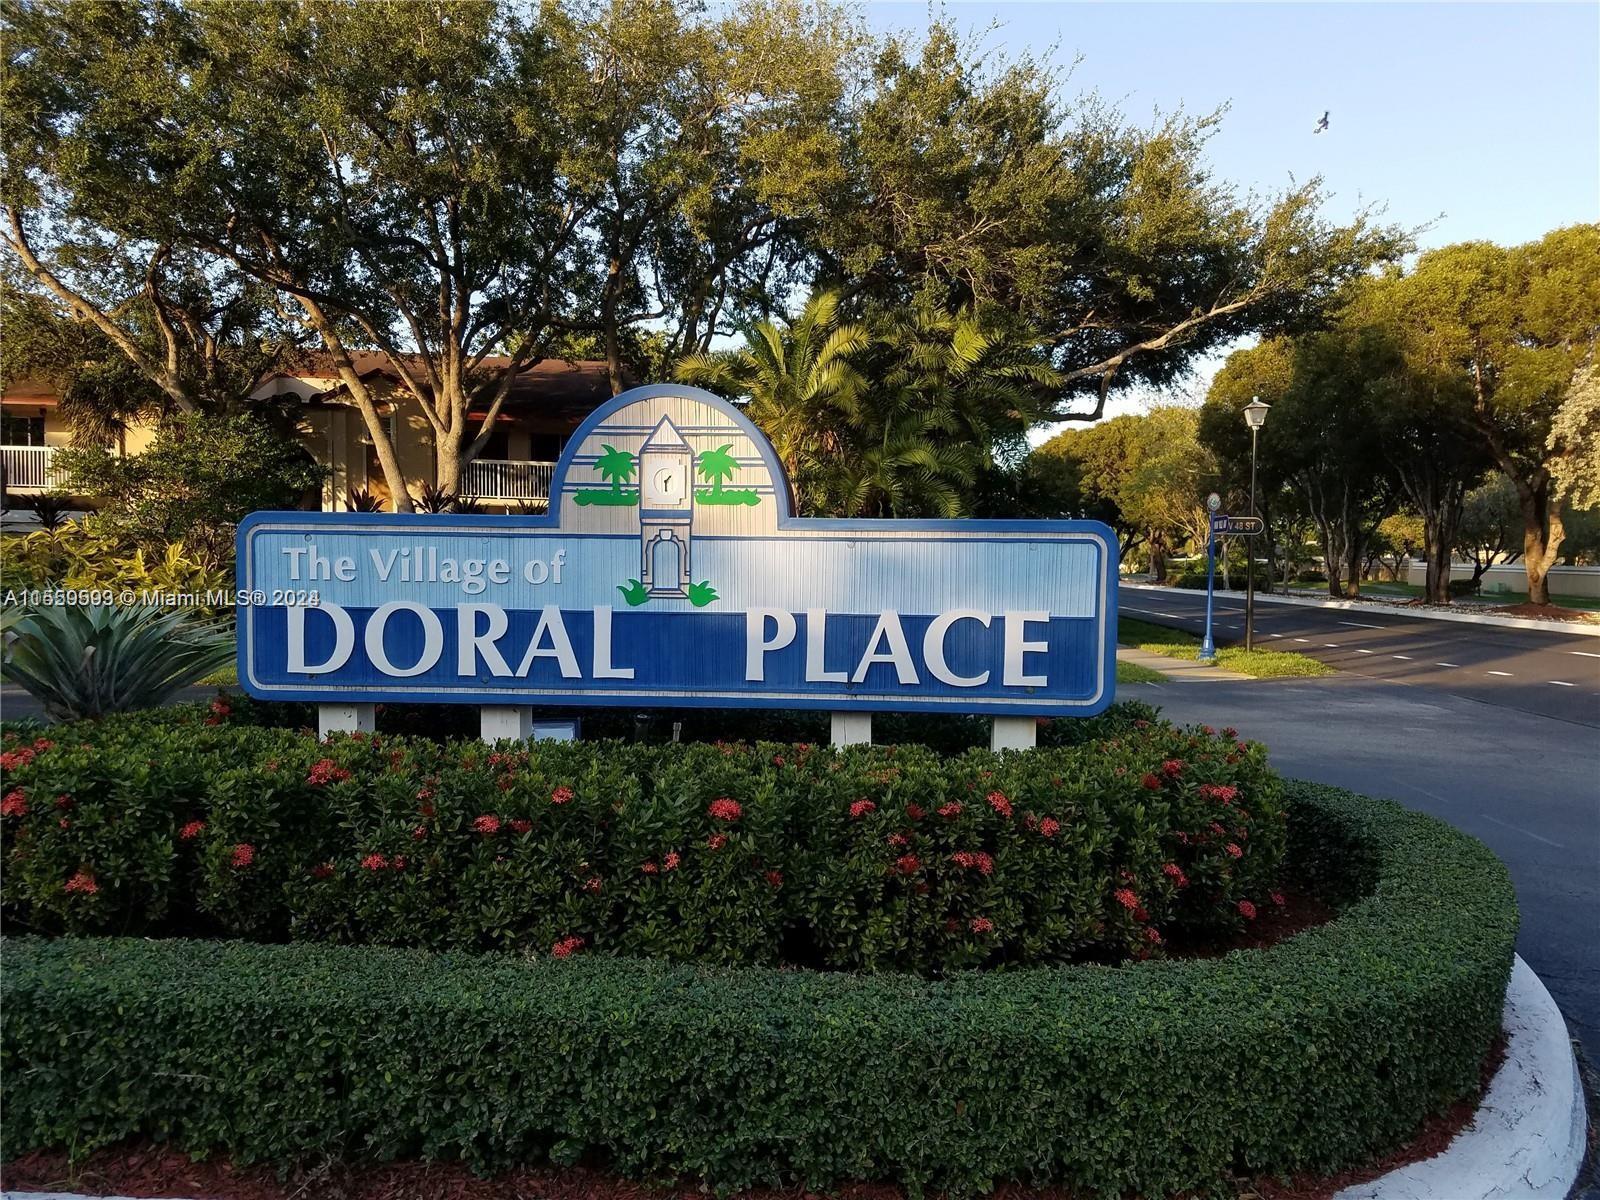 Photo of 4770 NW 102nd Ave #204-19 in Doral, FL